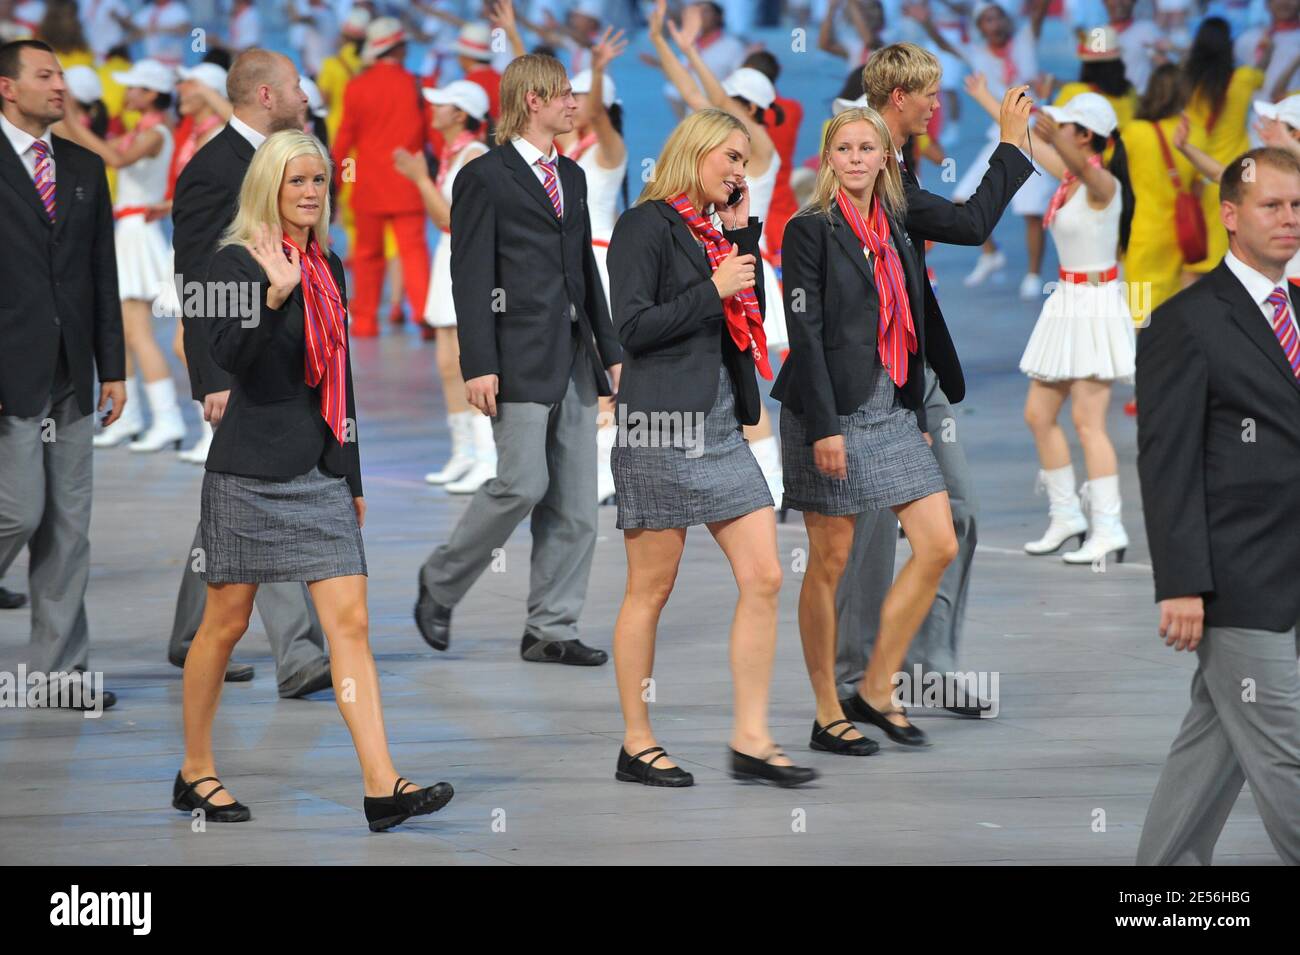 The Iceland delegation during the Opening Ceremony for the 2008 Beijing Summer Olympics at the National Stadium in Beijing, China on August 8, 2008. Photo by Jean-Michel Psaila/ABACAPRESS.COM Stock Photo